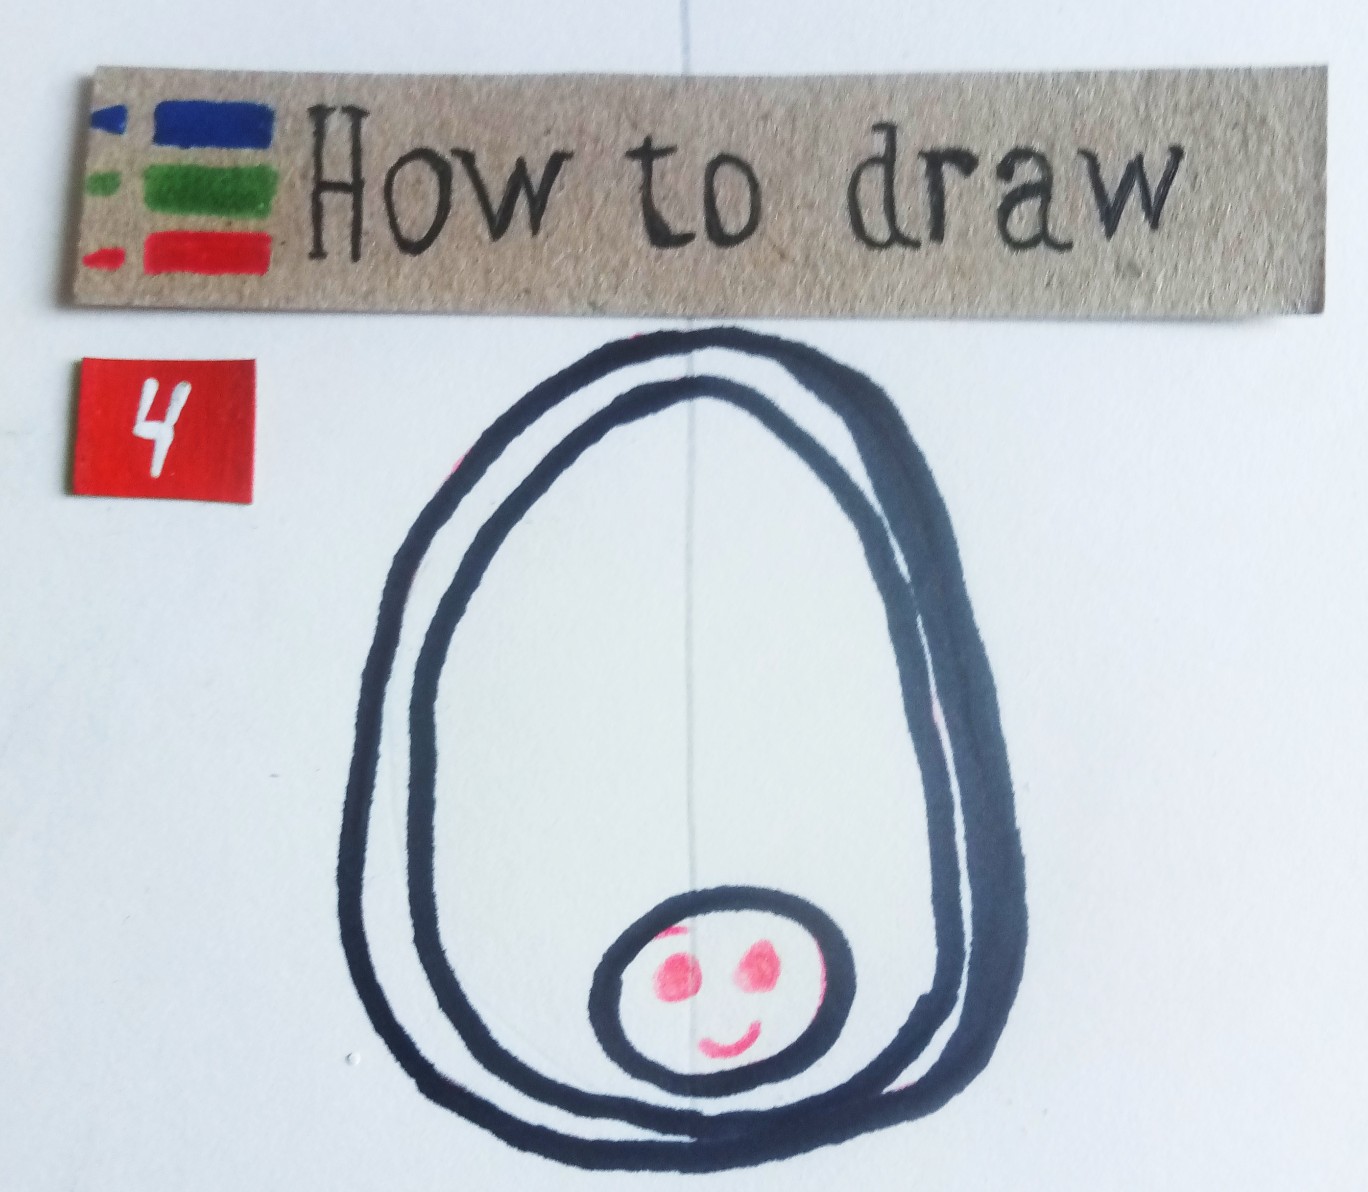 How to draw an avocado